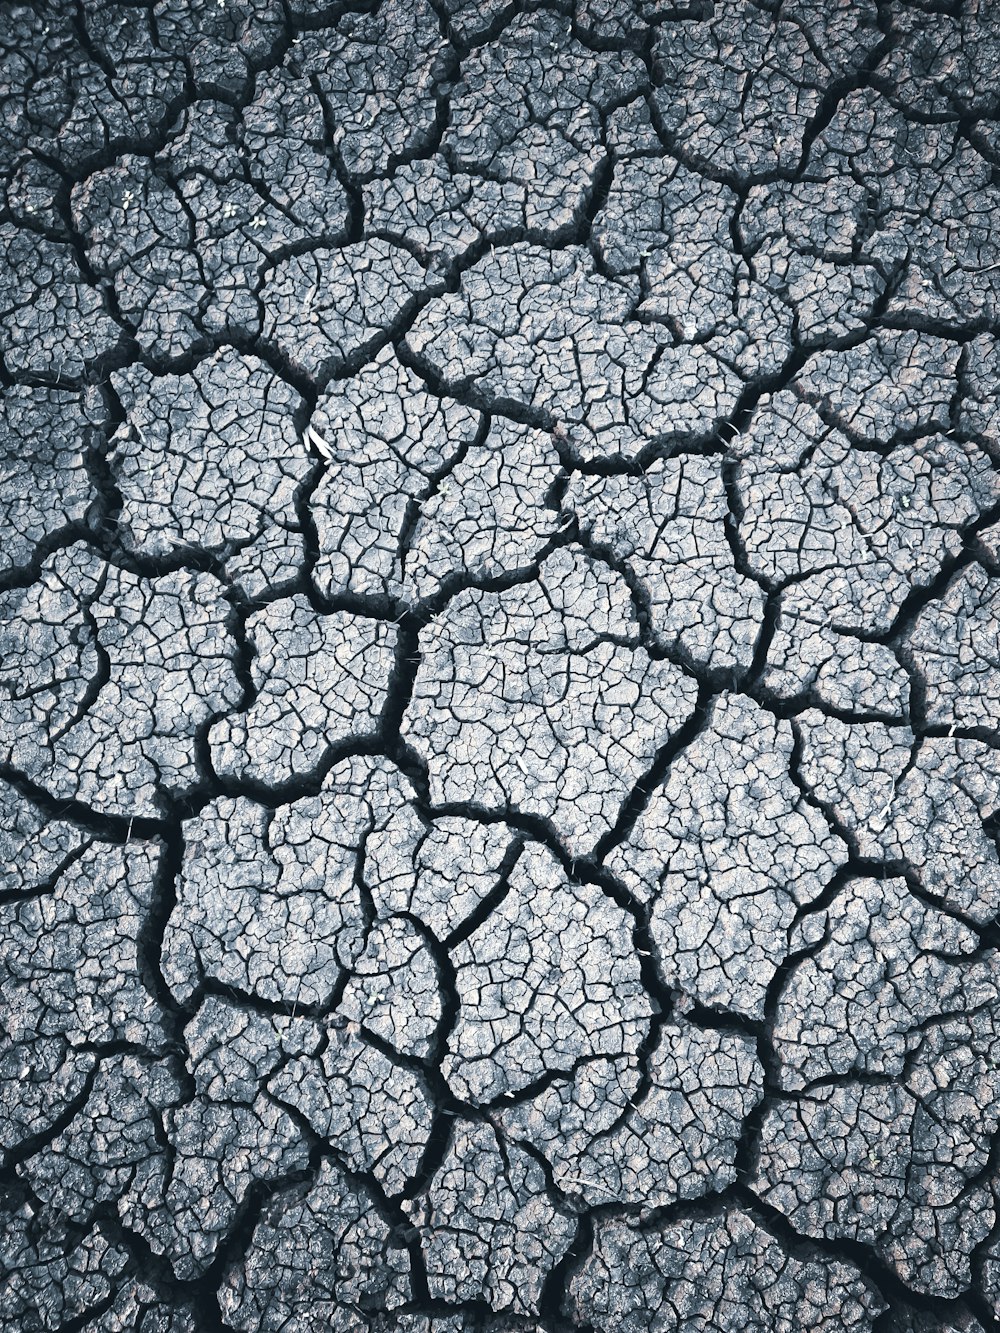 a close up of the cracks in the ground